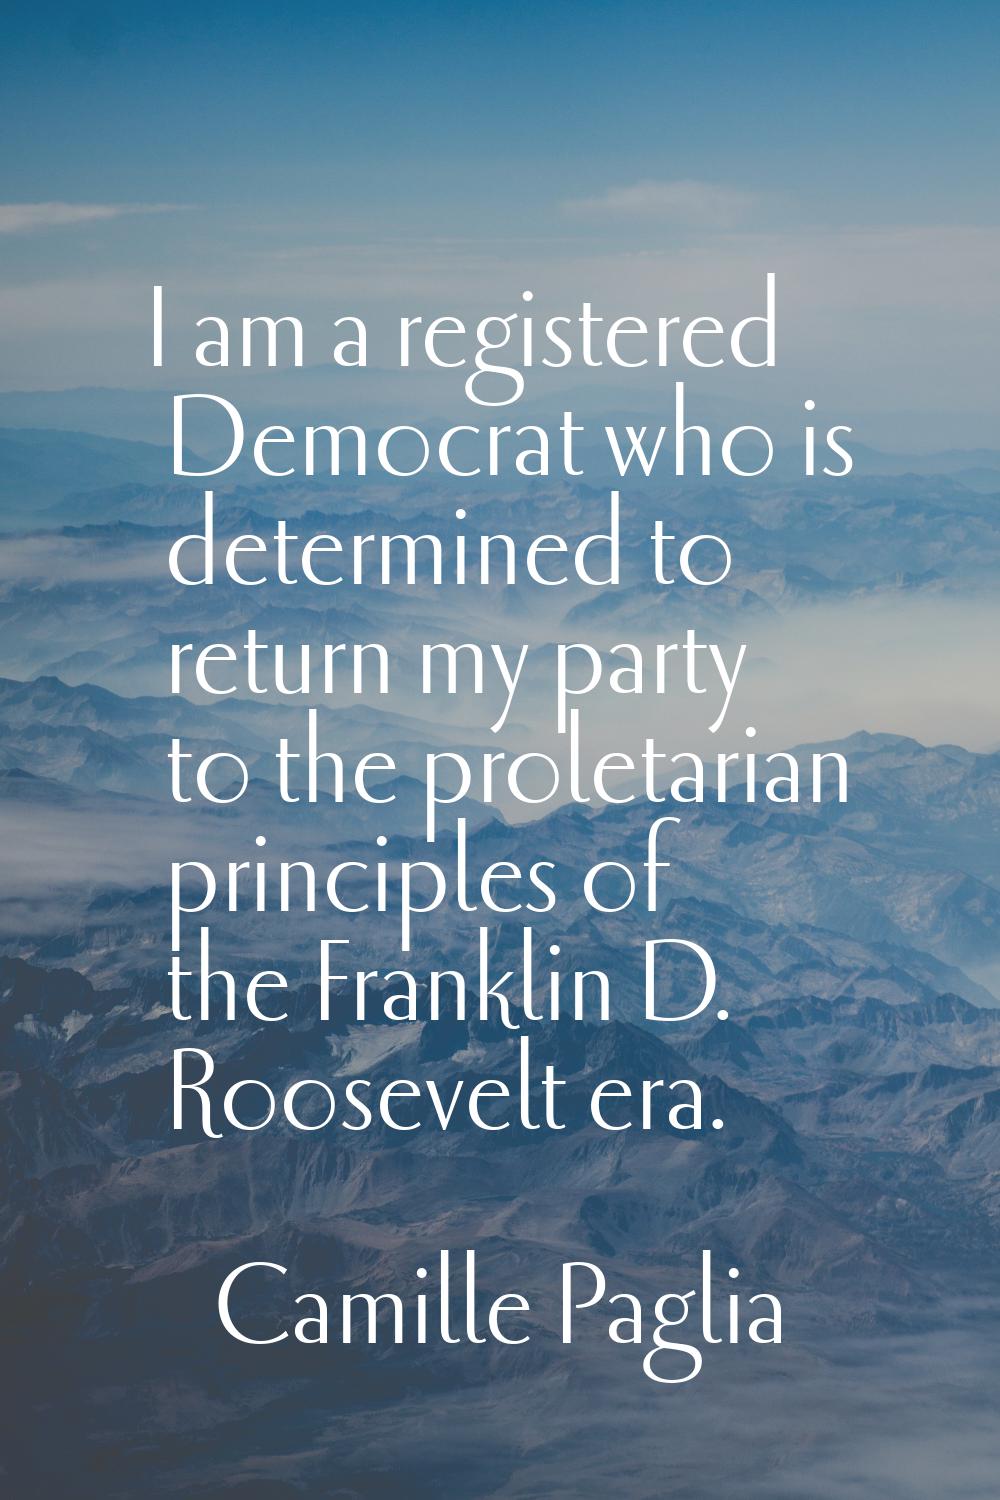 I am a registered Democrat who is determined to return my party to the proletarian principles of th